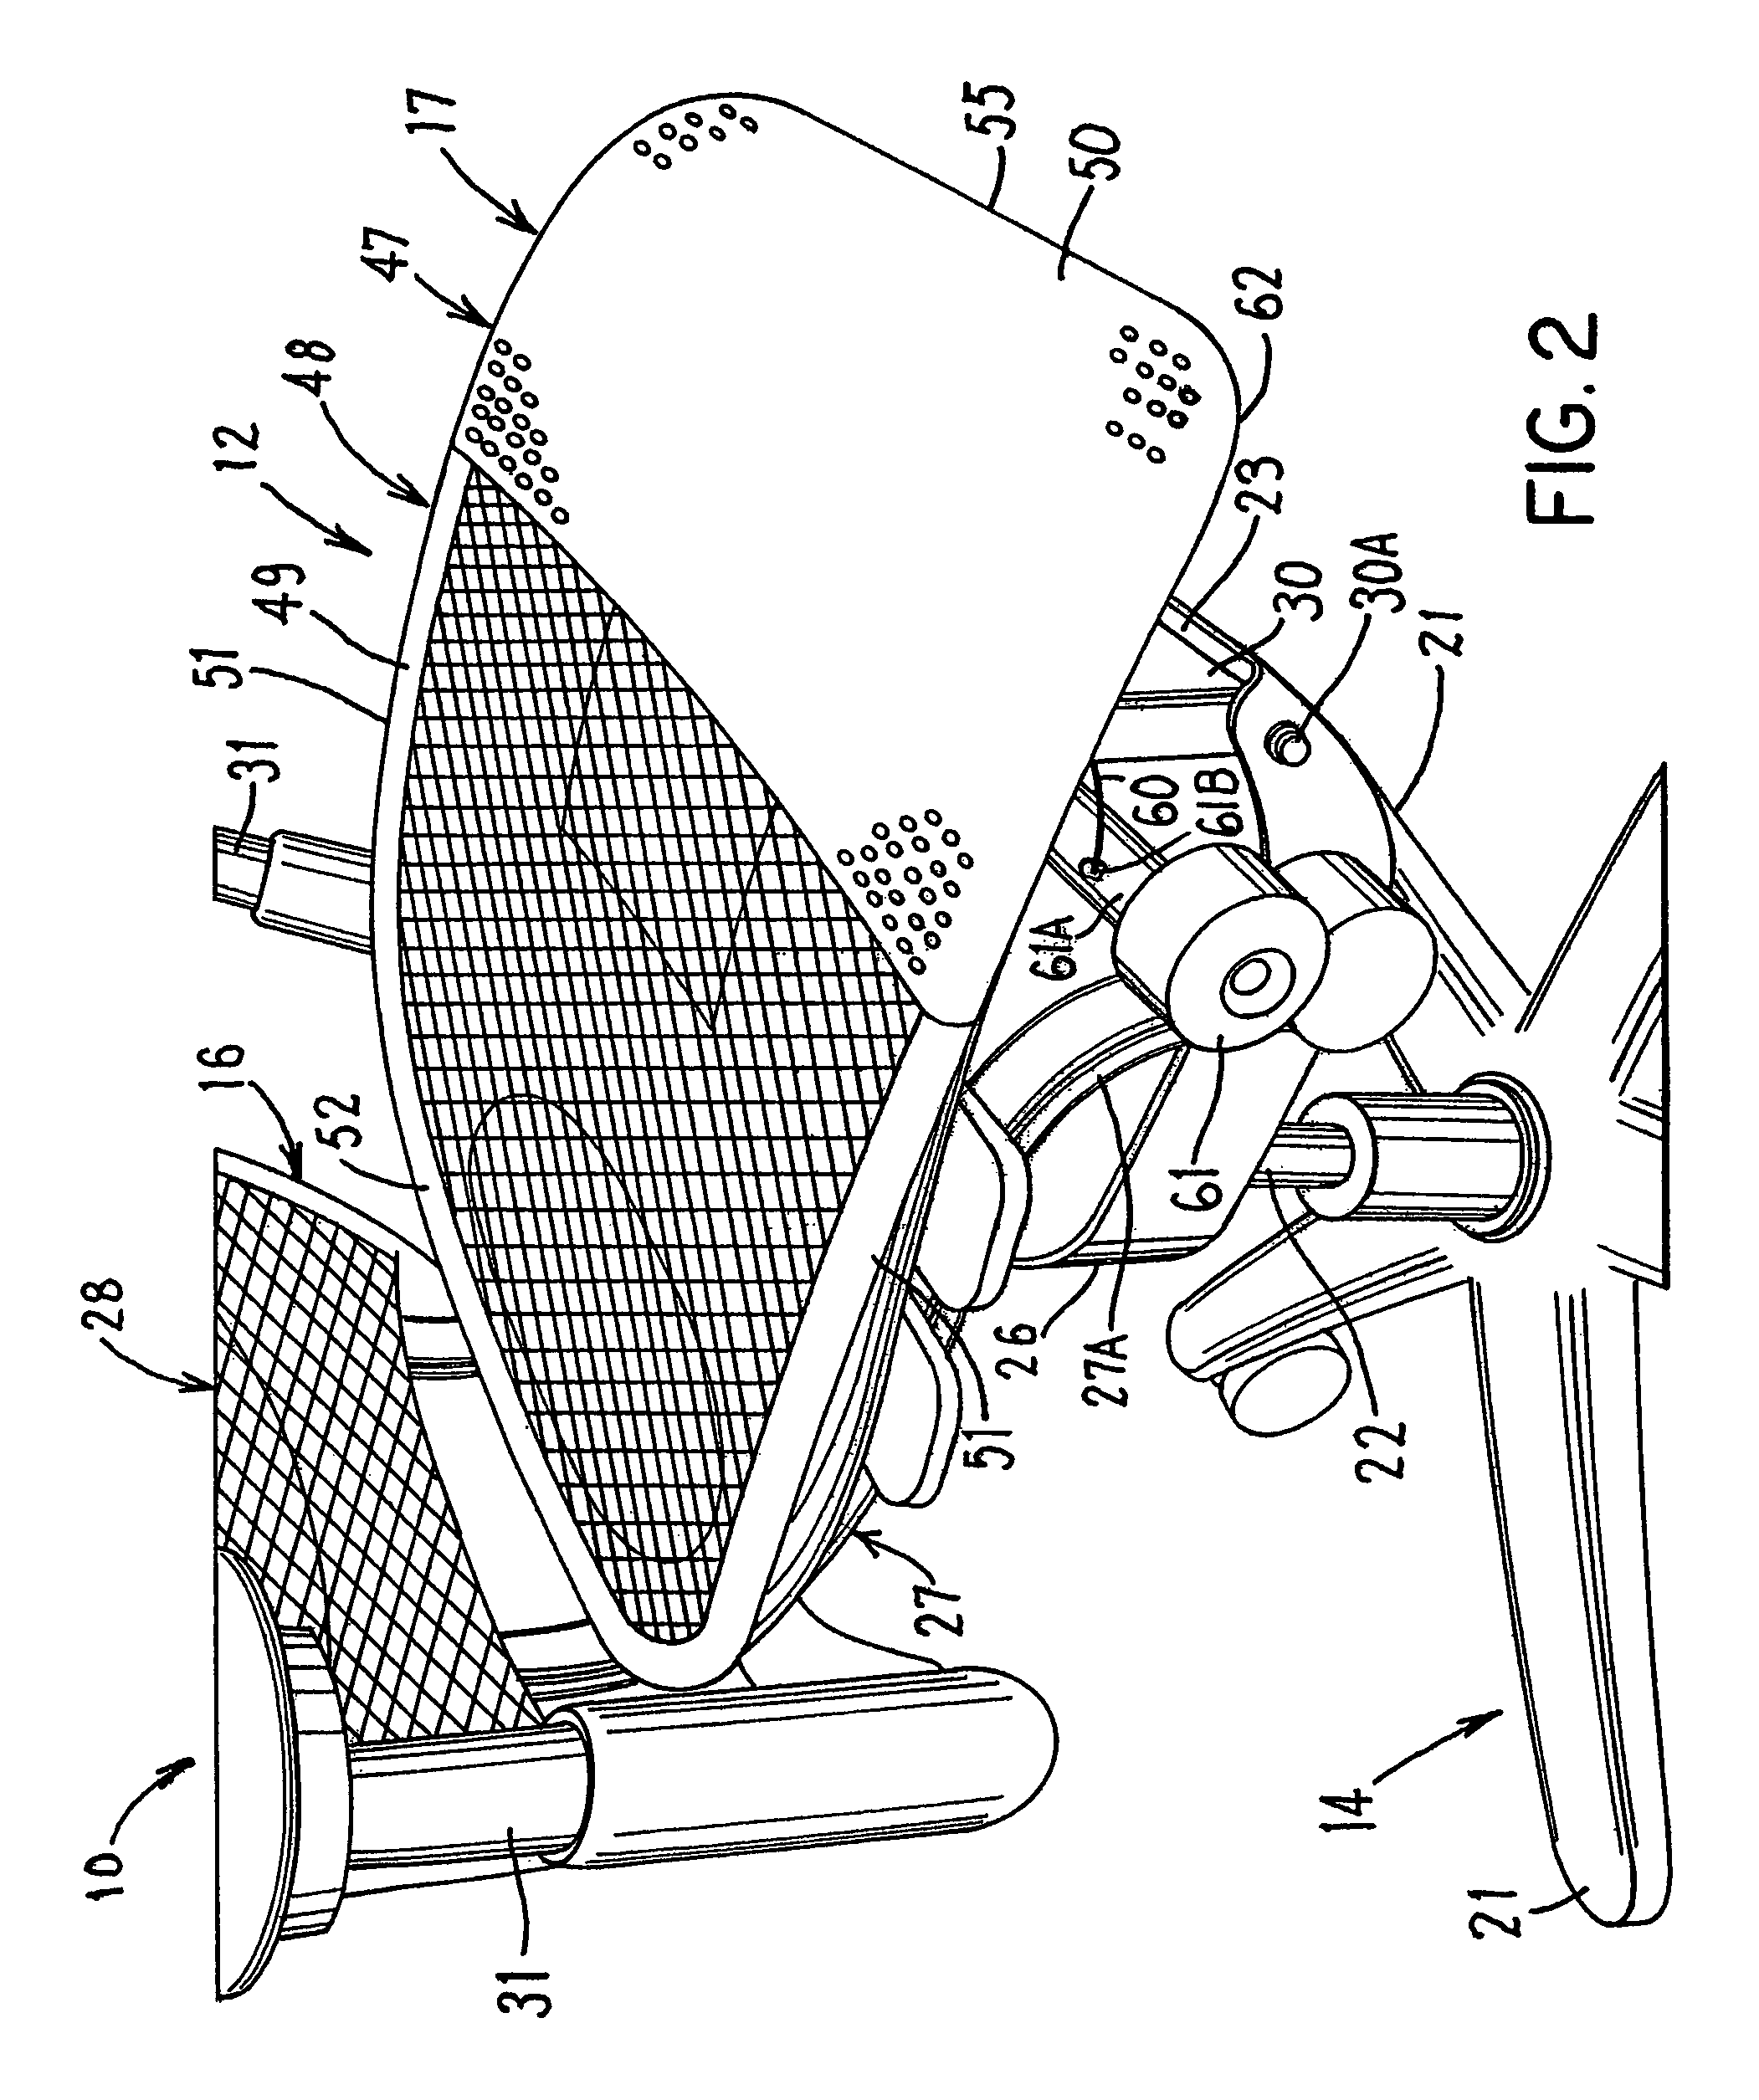 Chair having a suspension seat assembly